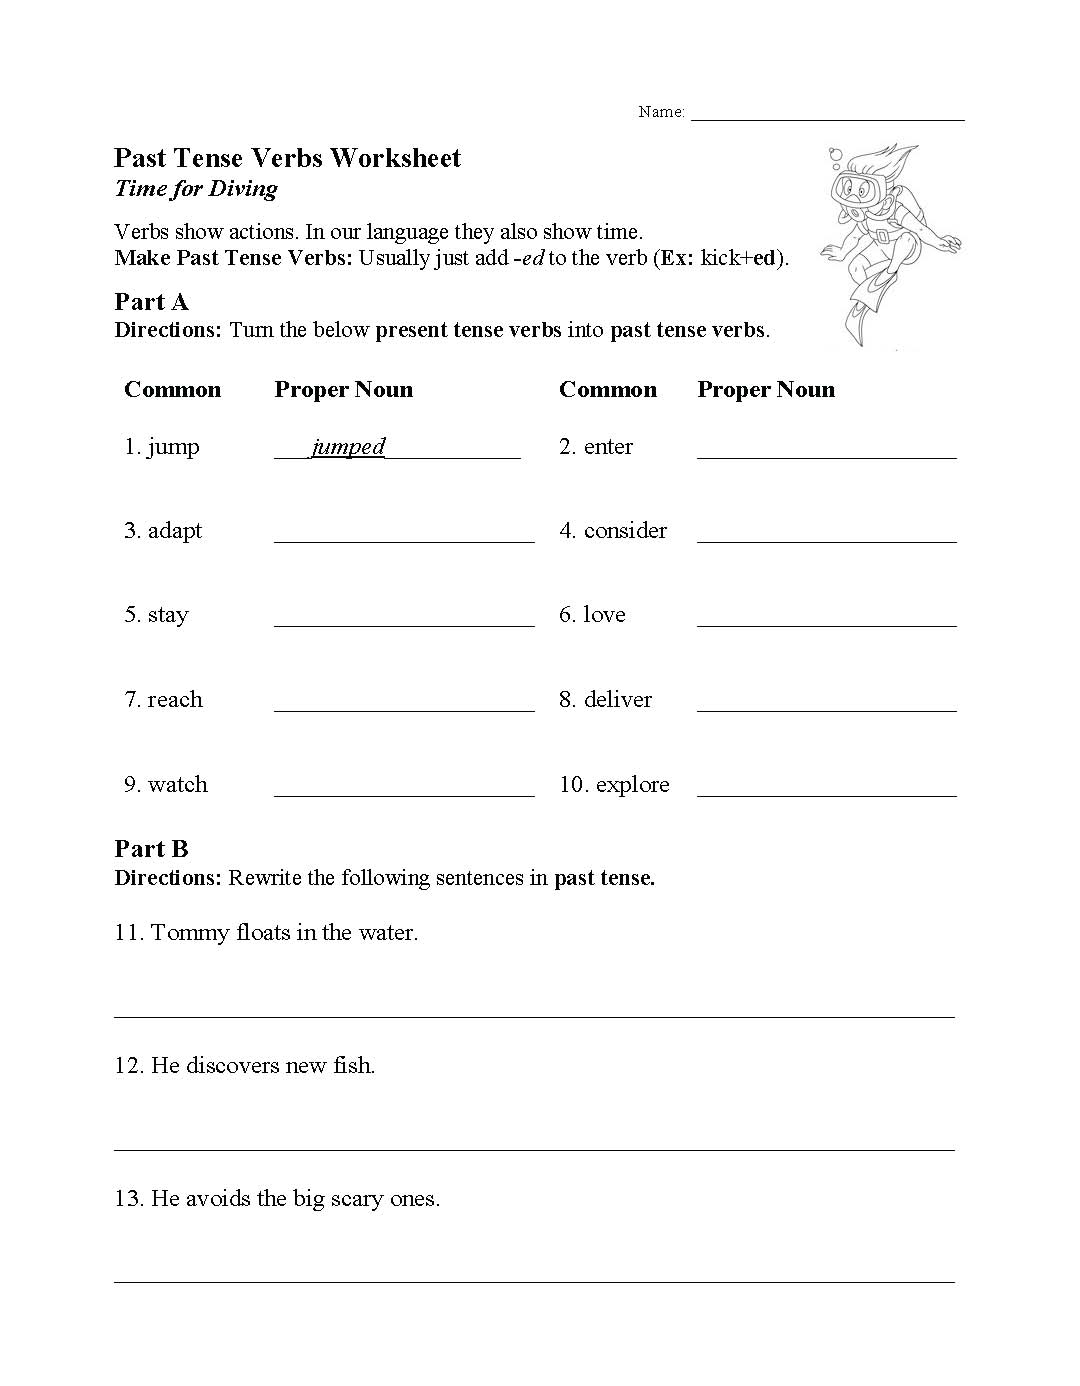 This is a preview image of our Past Tense Verbs Worksheet. Click on it to enlarge this image and view the source file.